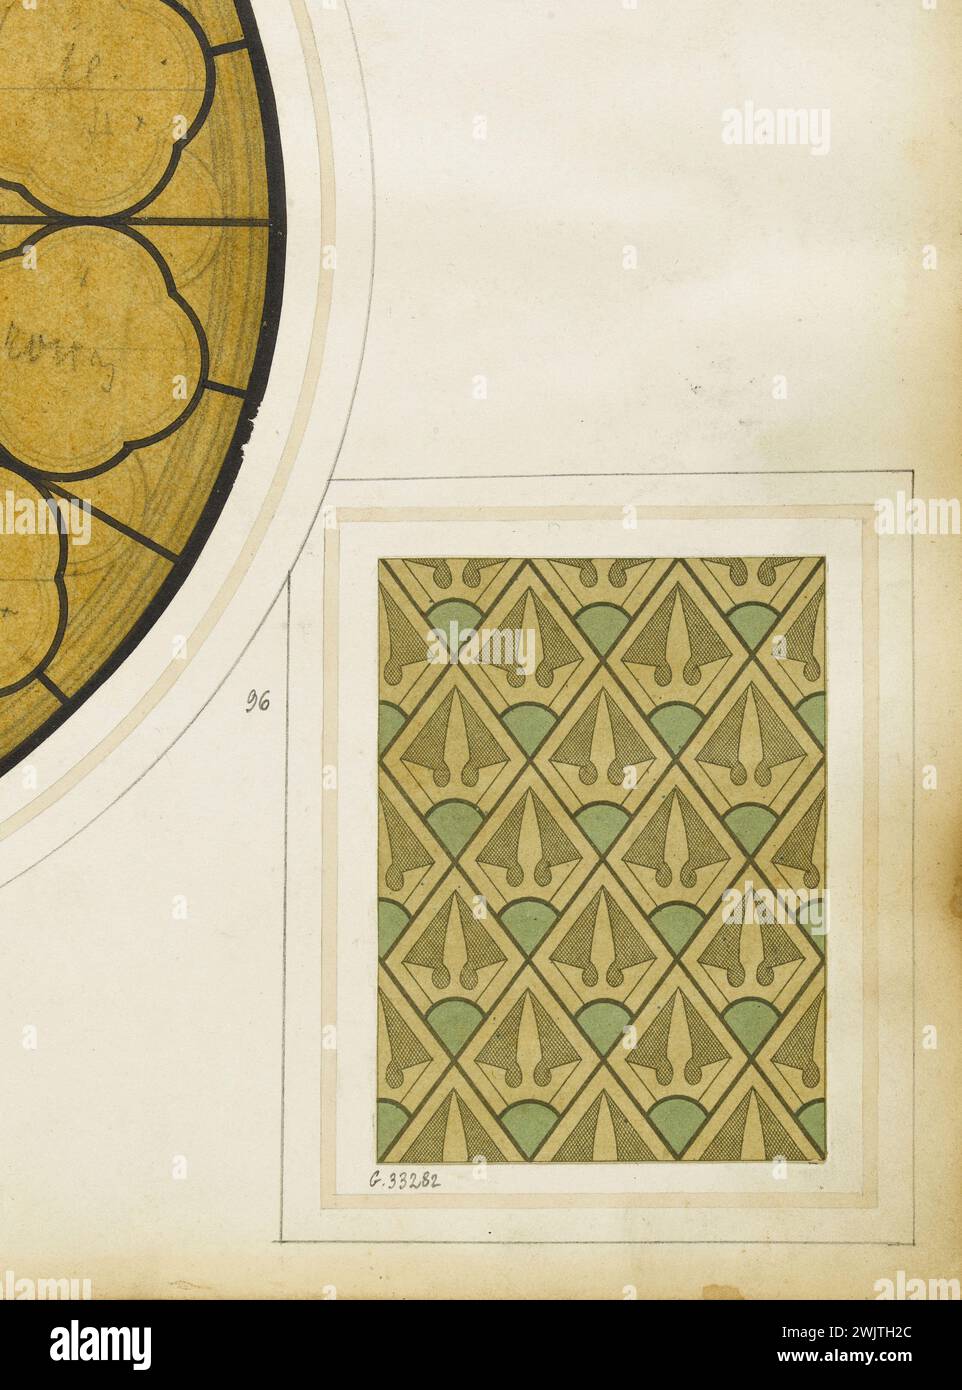 GSELL-Laurent workshop. Album n ° 3; stained glass motif: diamonds. Chromolithography. Paris, Carnavalet museum. Album n ° 3, chromolithography, diamond, motif, stained glass Stock Photo